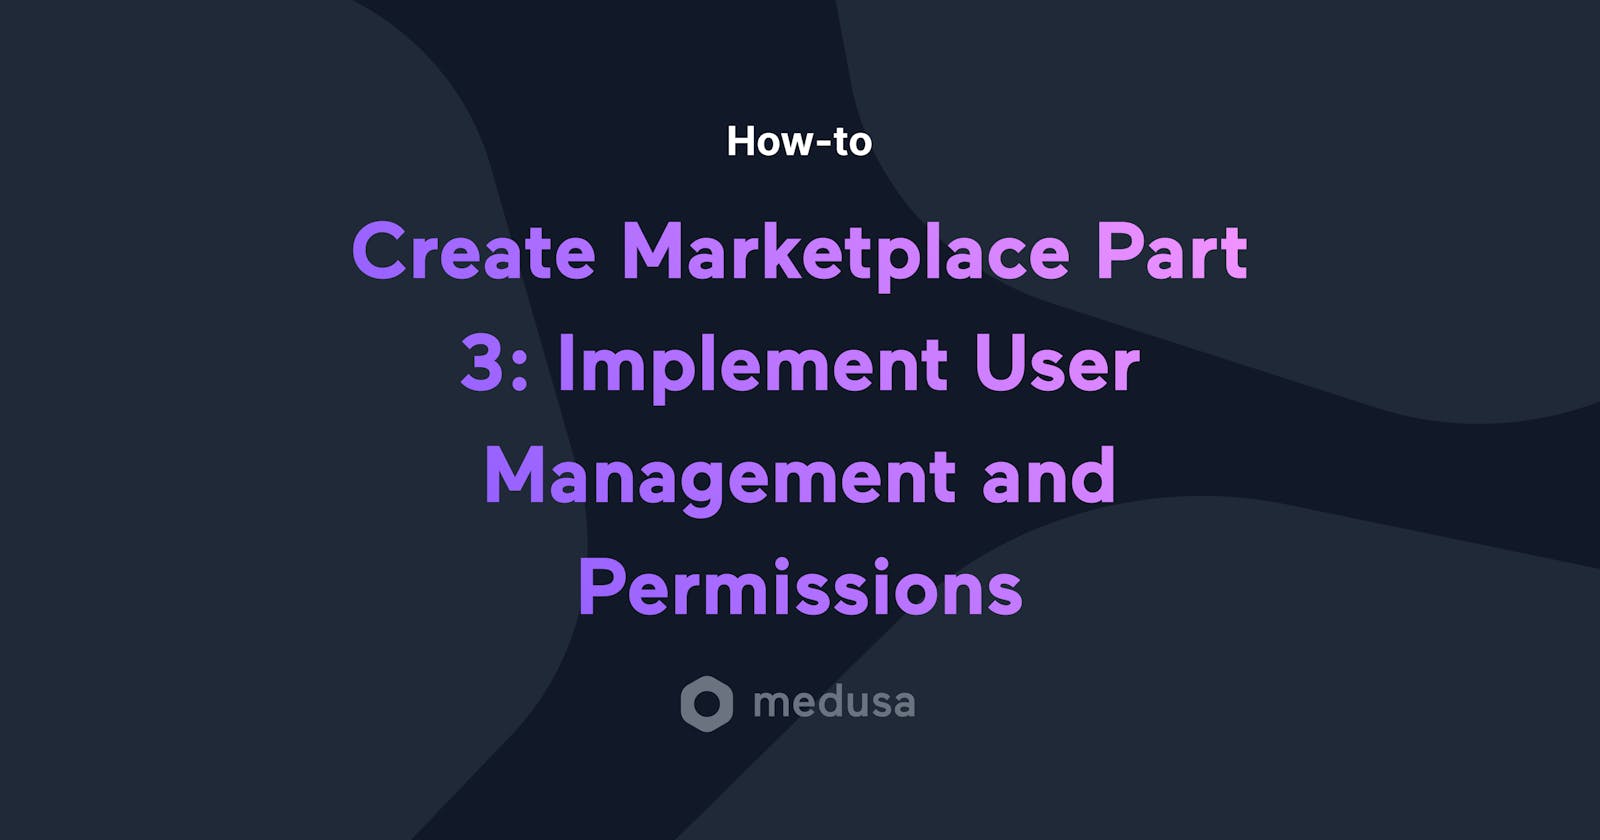 Create an Online Marketplace Part 3: Implement User Management and Permissions